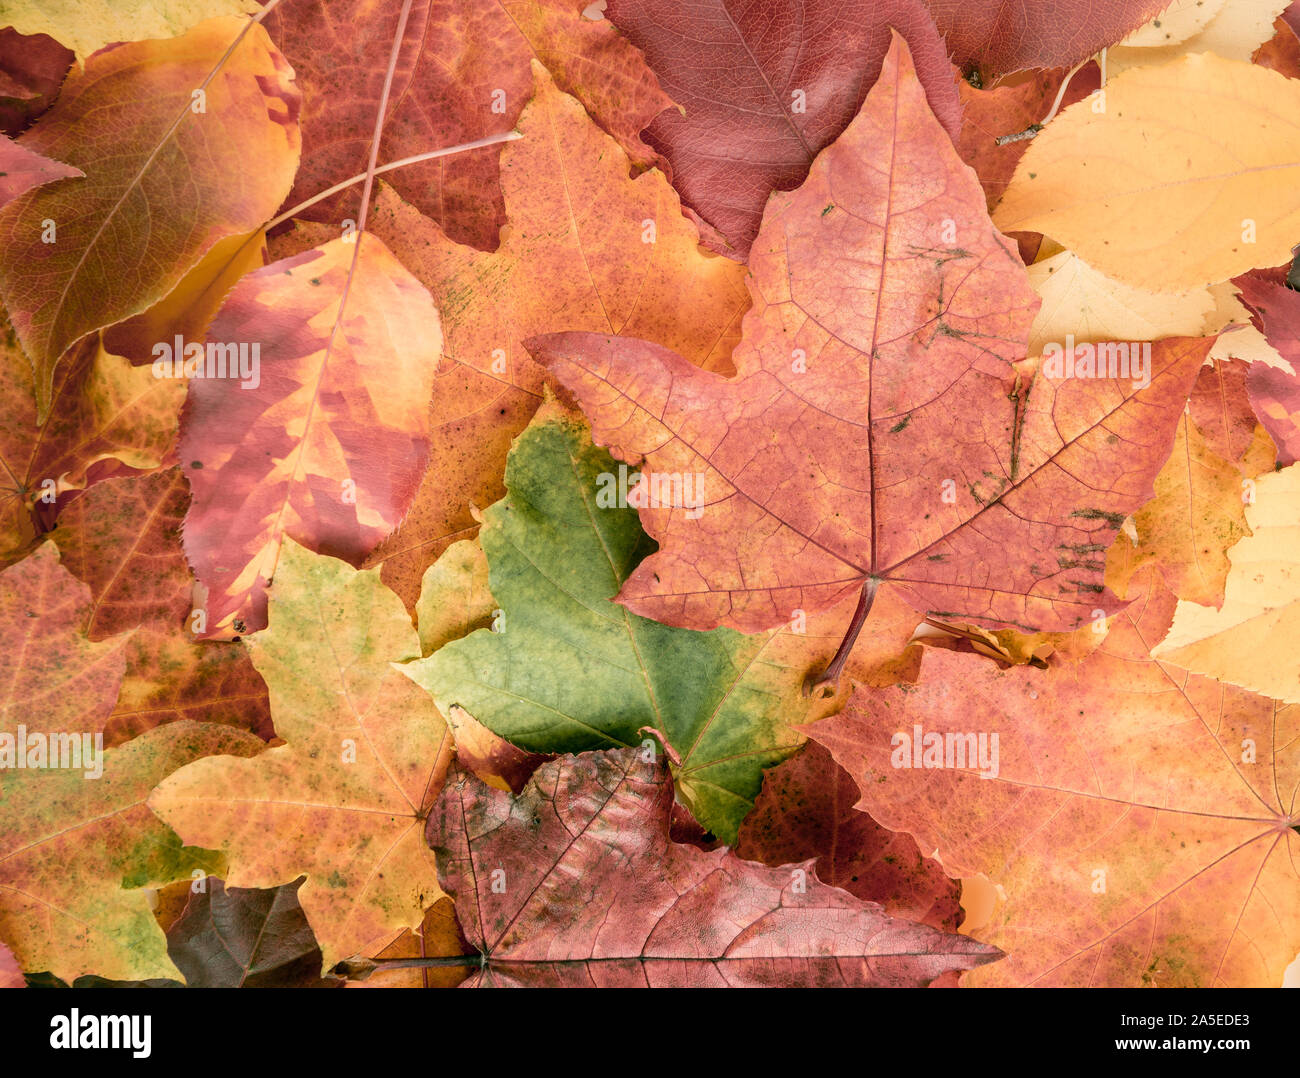 Autumn colored red and yellow fall leaves background Stock Photo